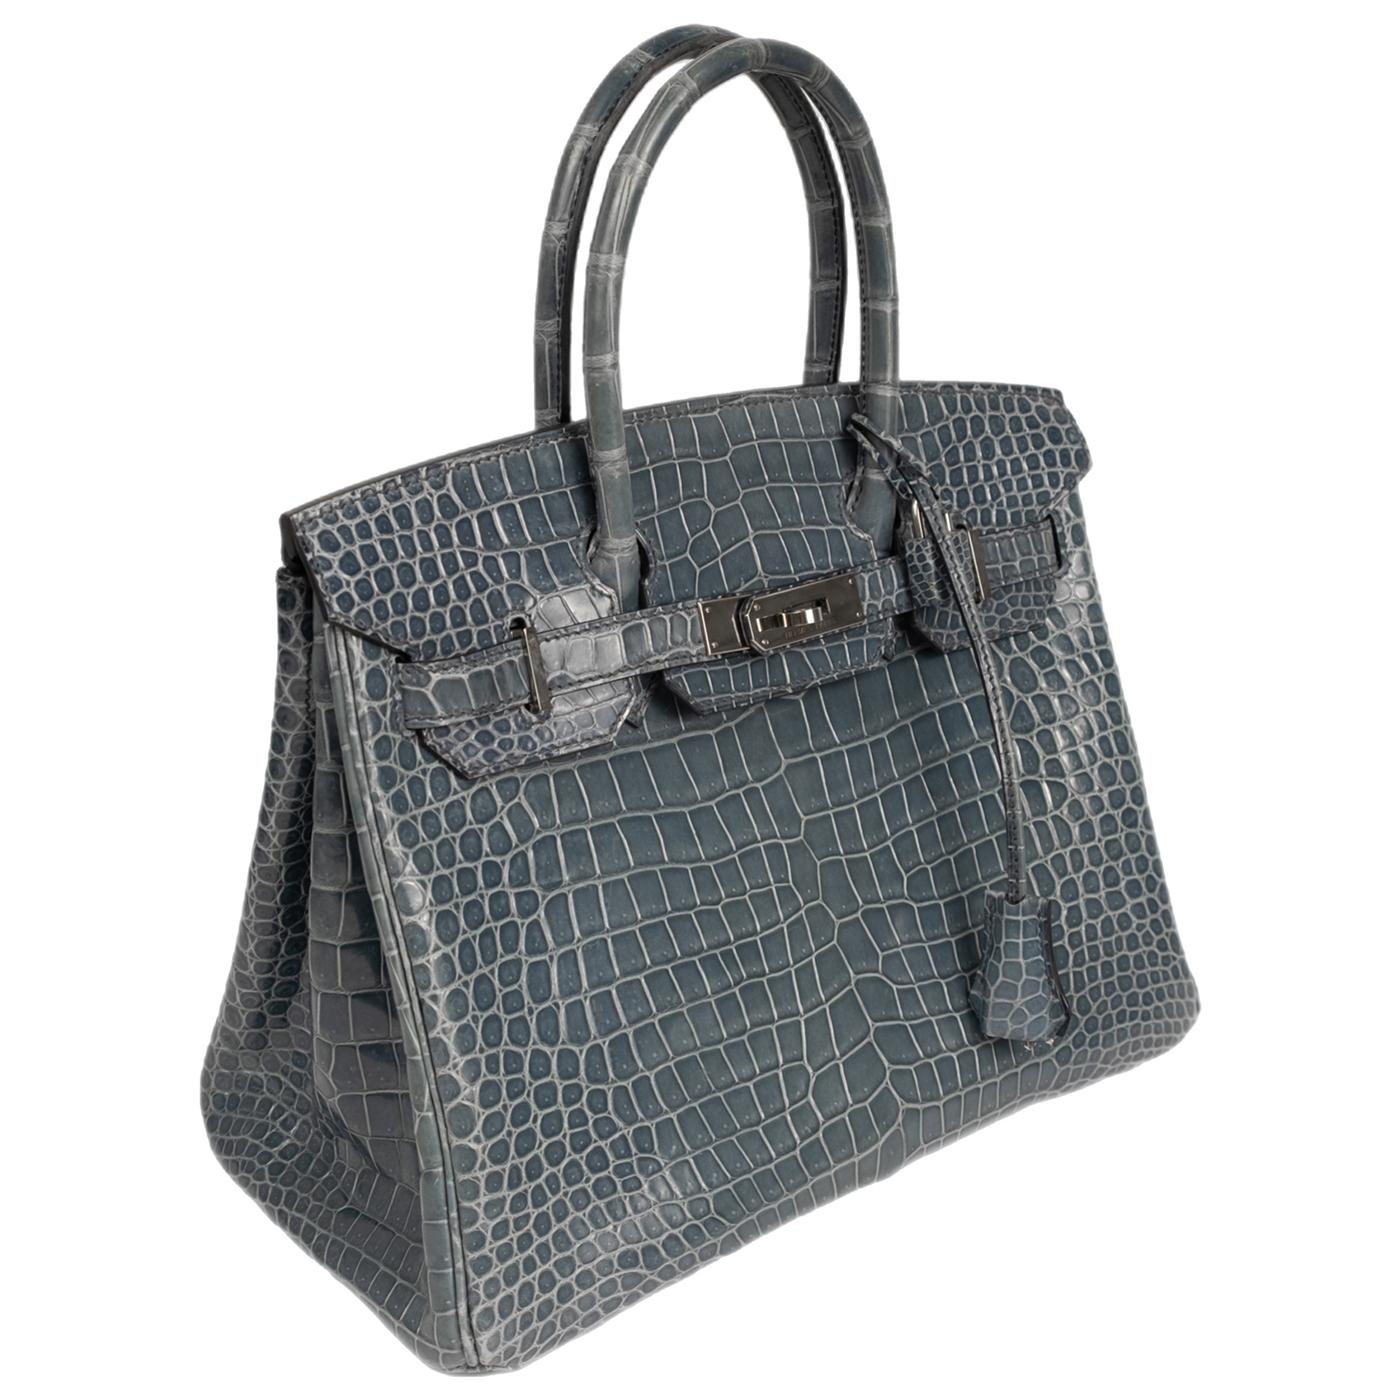 This is a pre-owned Hermes Birkin bag. It is Crocodile Leather with Exterior / Interior Color in Blue Jeans with Gold hardware. It is a size 30cm, measuring at 30″x22″x16″. It is in pre-owned condition. Includes Original Box.

Details:
Brand: